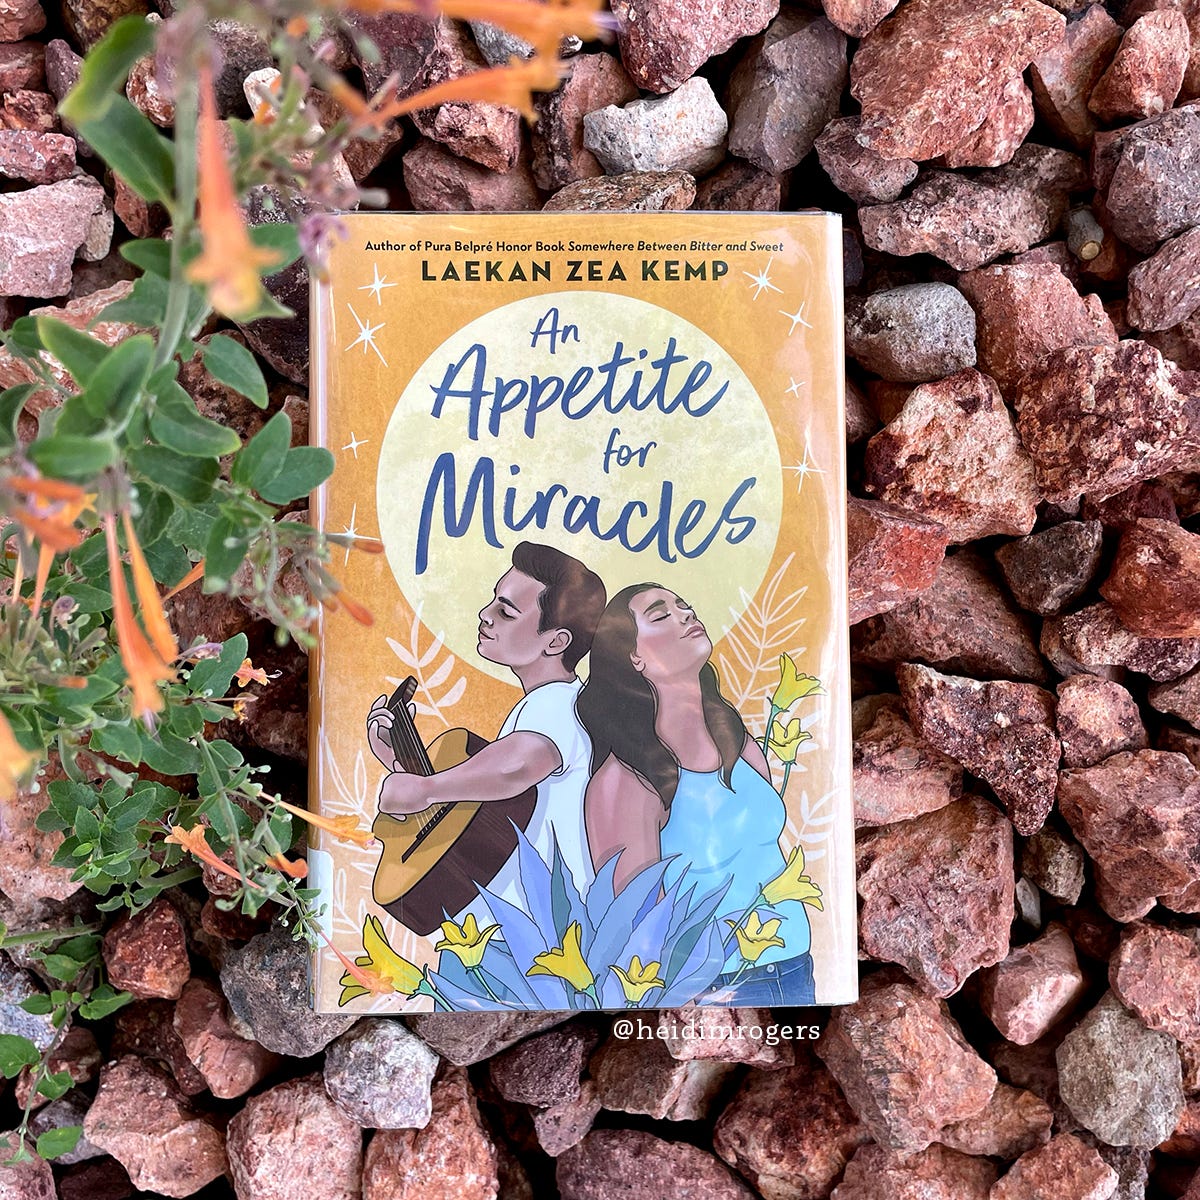 Cover of An Appetite for Miracles by Laekan Zea Kemp on a bed of red rocks with orange flowers